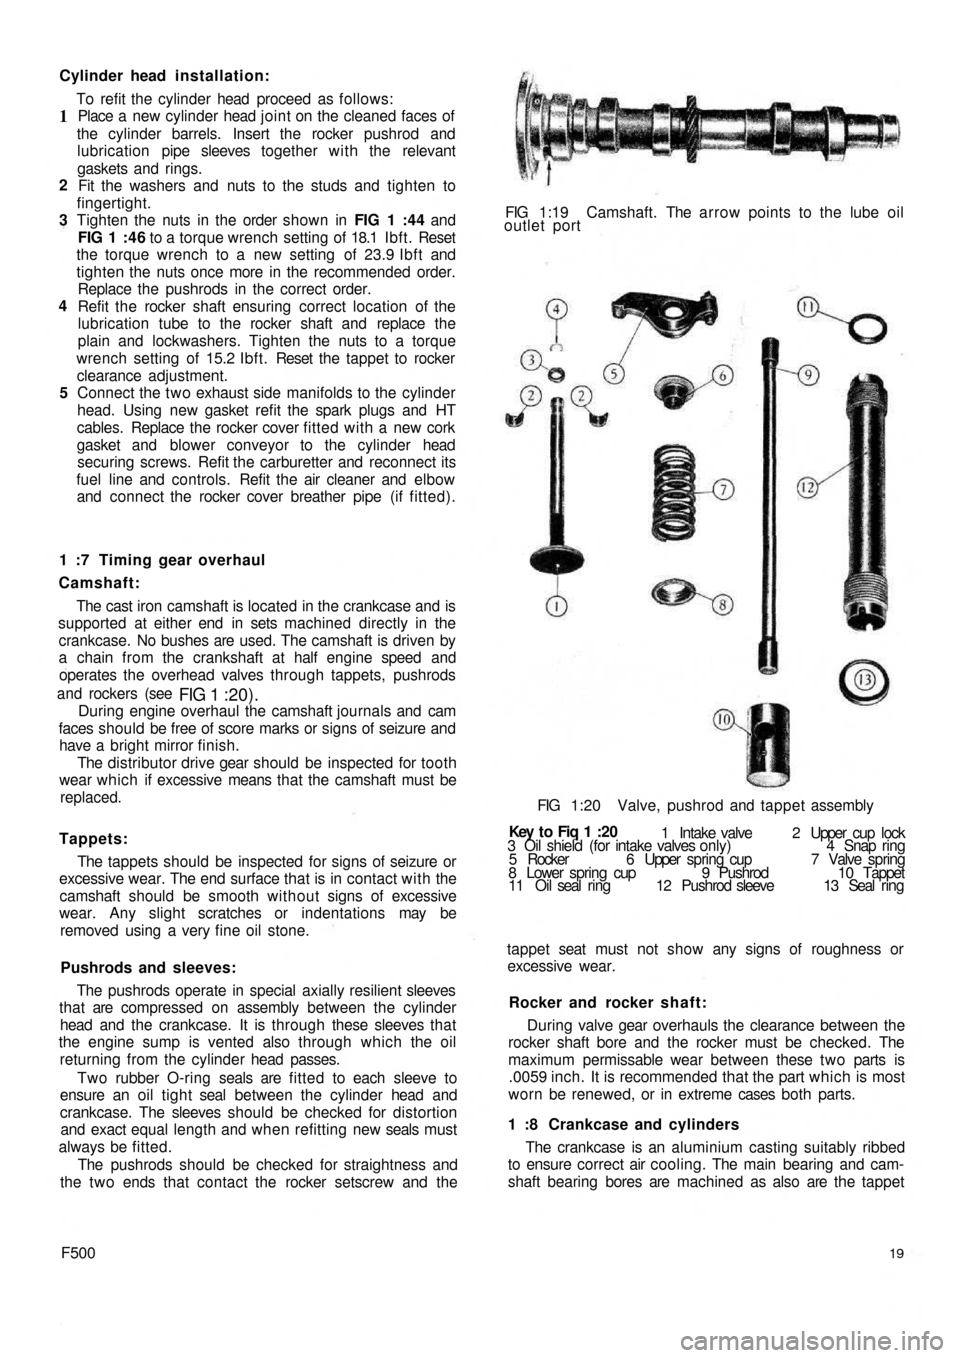 FIAT 500 1966 1.G Workshop Manual Cylinder head installation:
To refit the cylinder head proceed as follows:
Place a  new cylinder  head joint on the cleaned faces of
the cylinder barrels. Insert the rocker pushrod and
lubrication pip